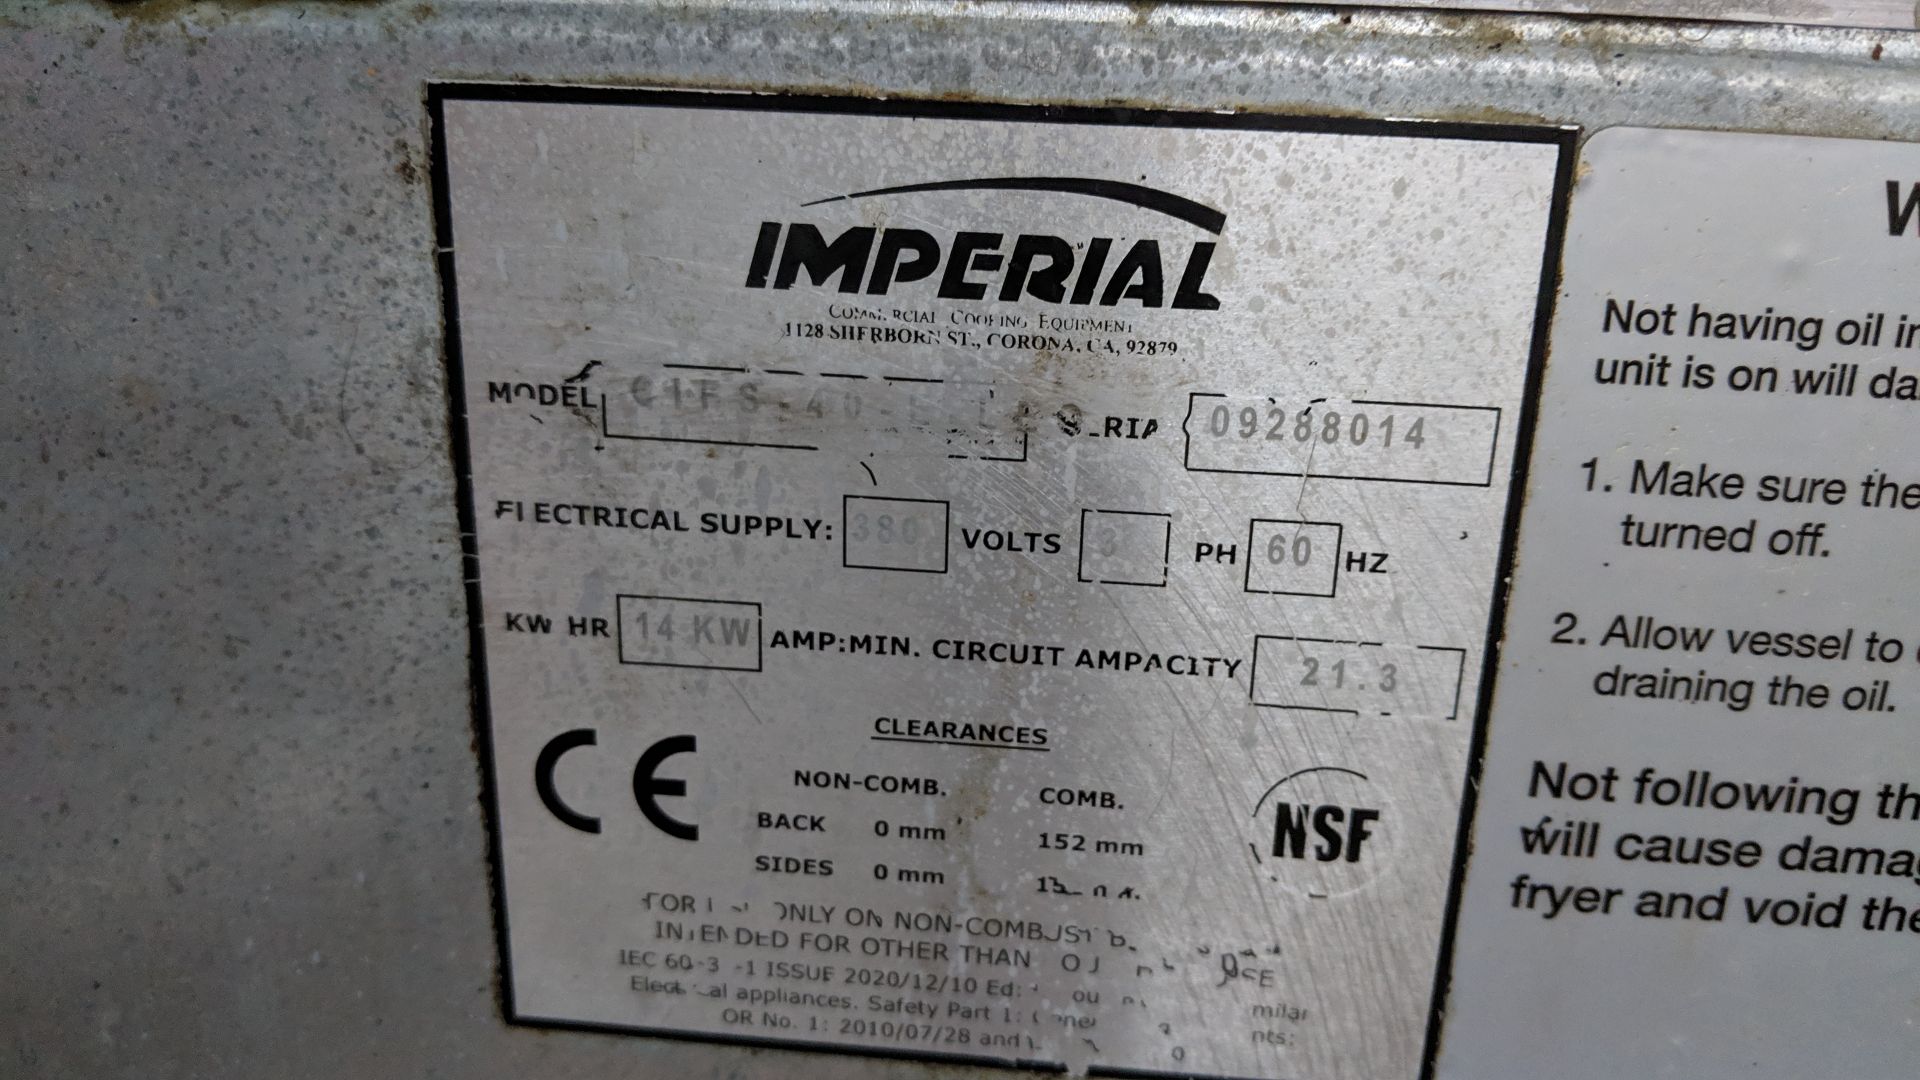 Imperial stainless steel floorstanding fryer, CIFS-40-E-LE IMPORTANT: Please remember goods - Image 4 of 5